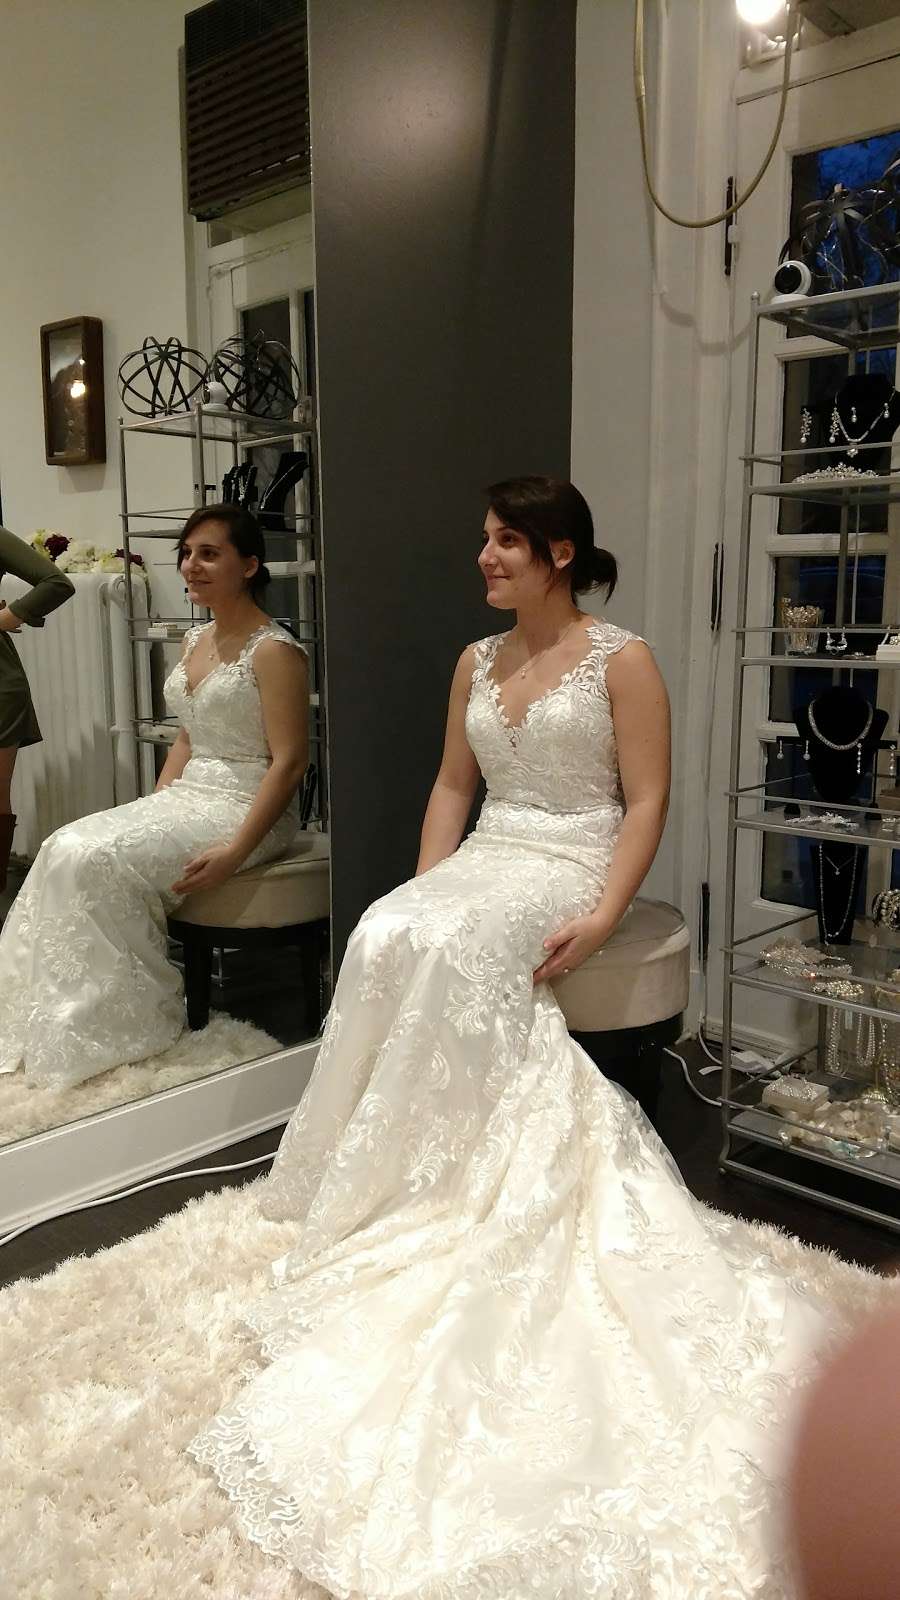 Tulle Bridal | 342 N Main St, Andover, MA 01810 | Phone: (978) 470-1002